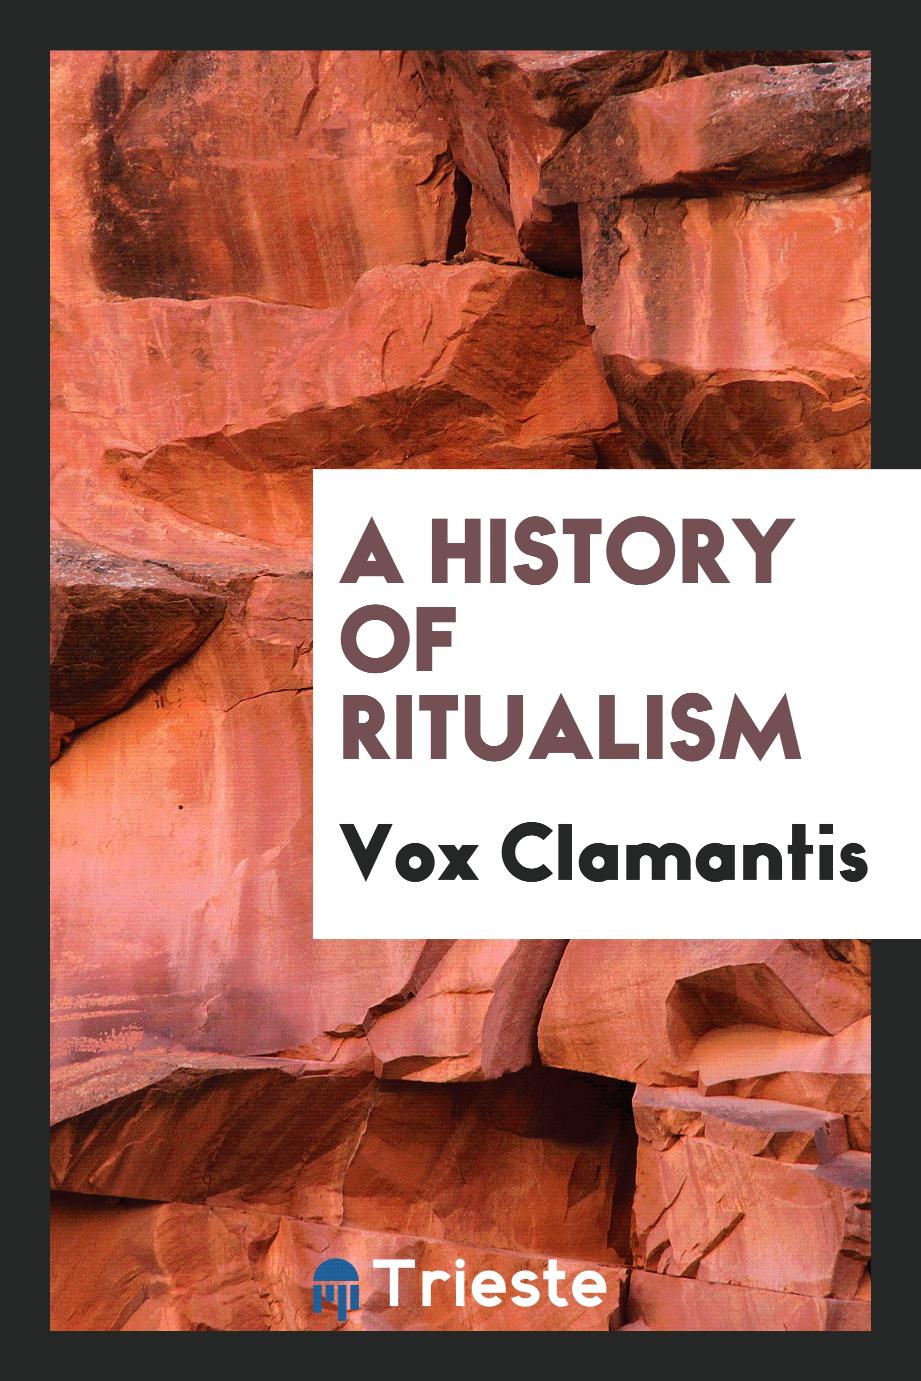 A history of ritualism